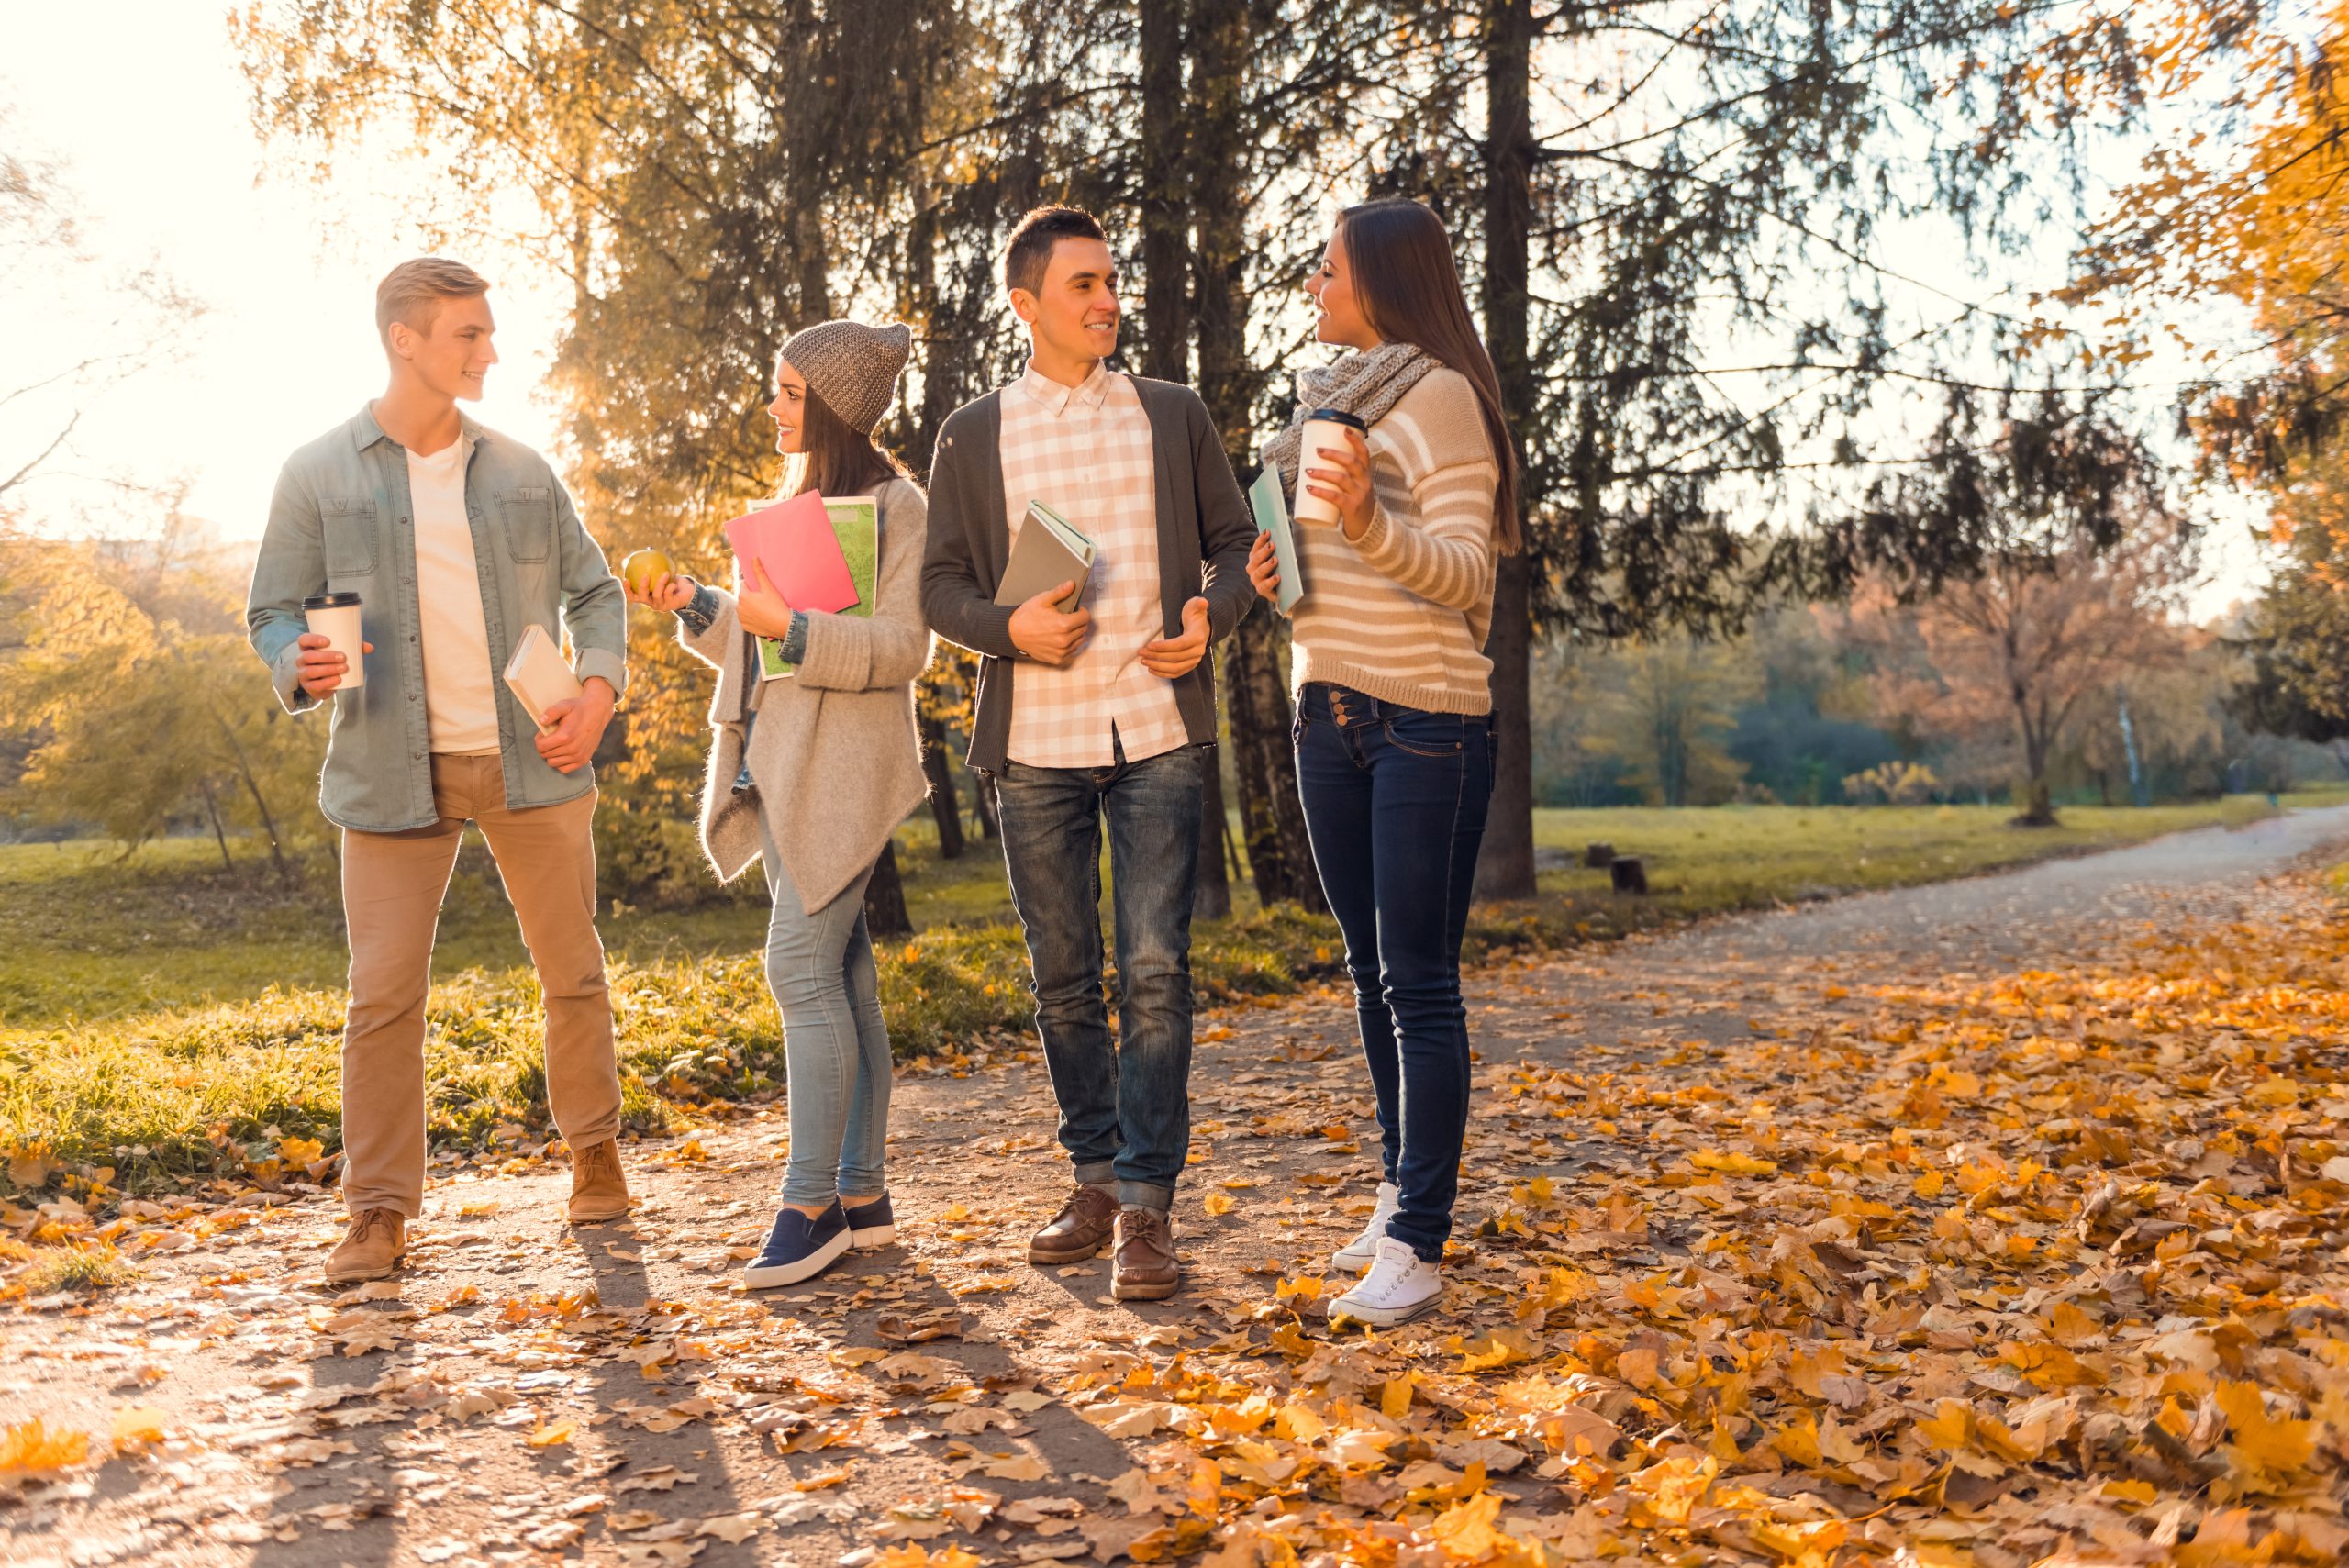 Group of young people students while walking autumn park